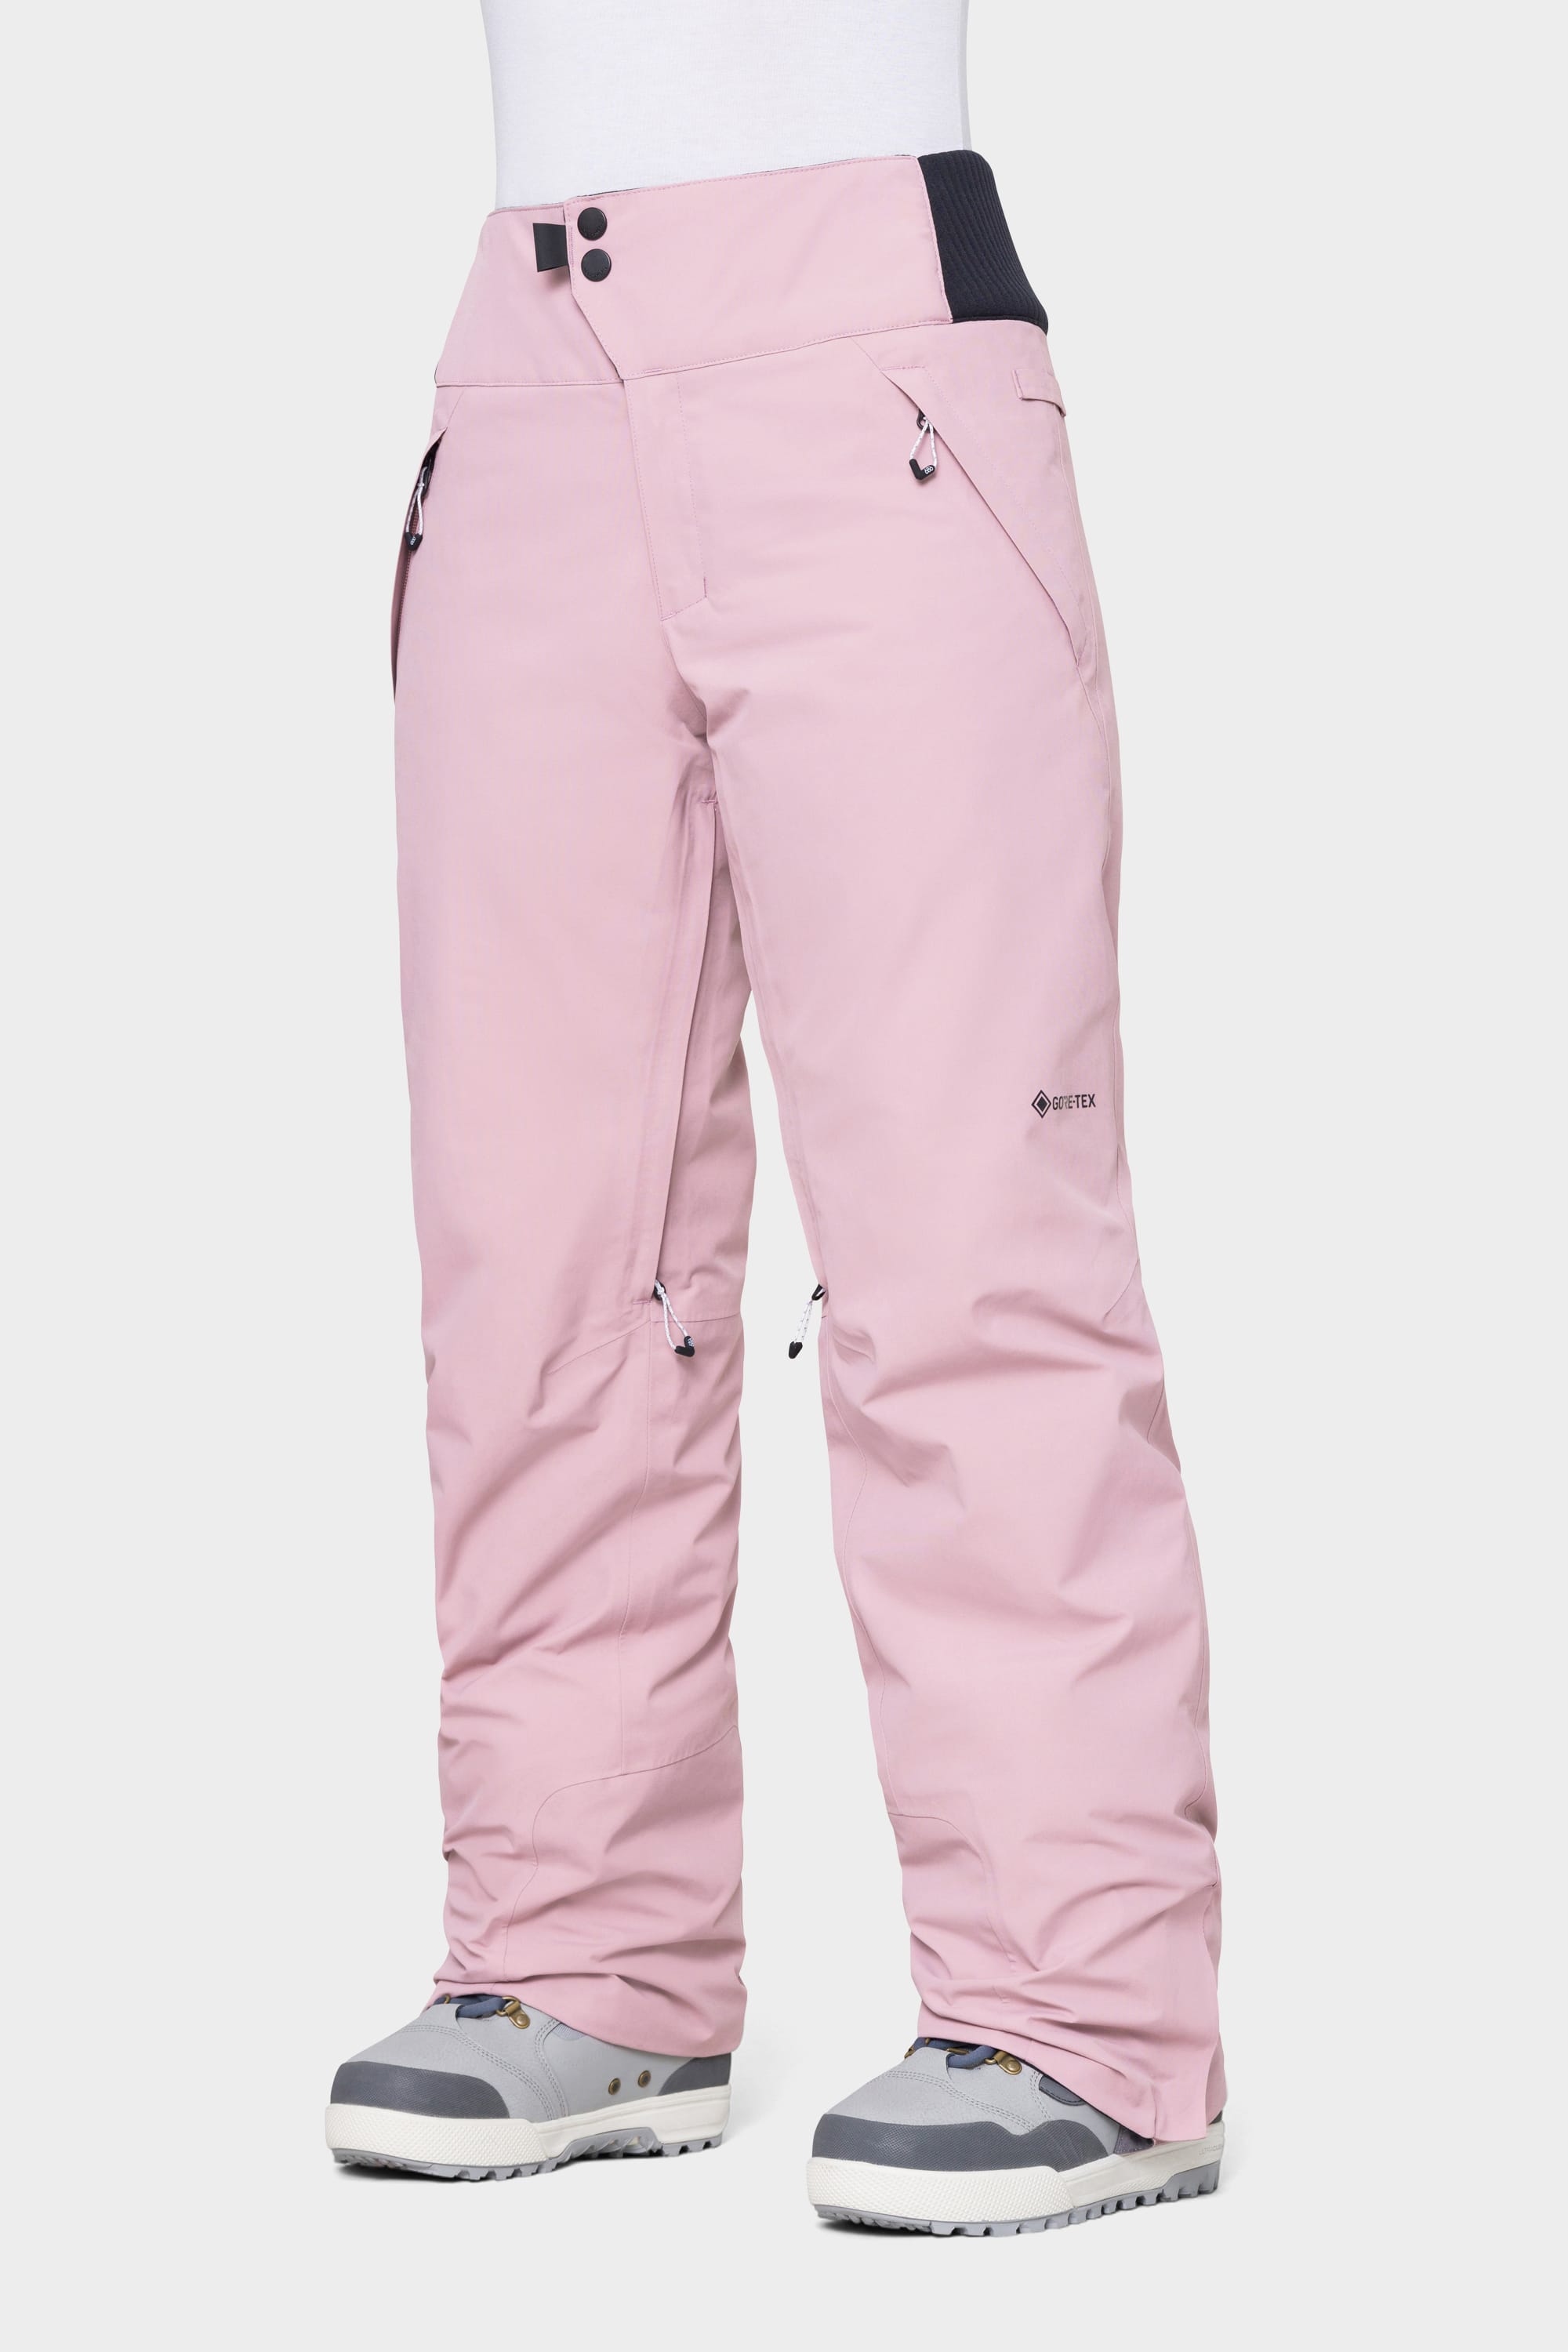 686 Women's GORE-TEX Willow Insulated Pant – 686.com